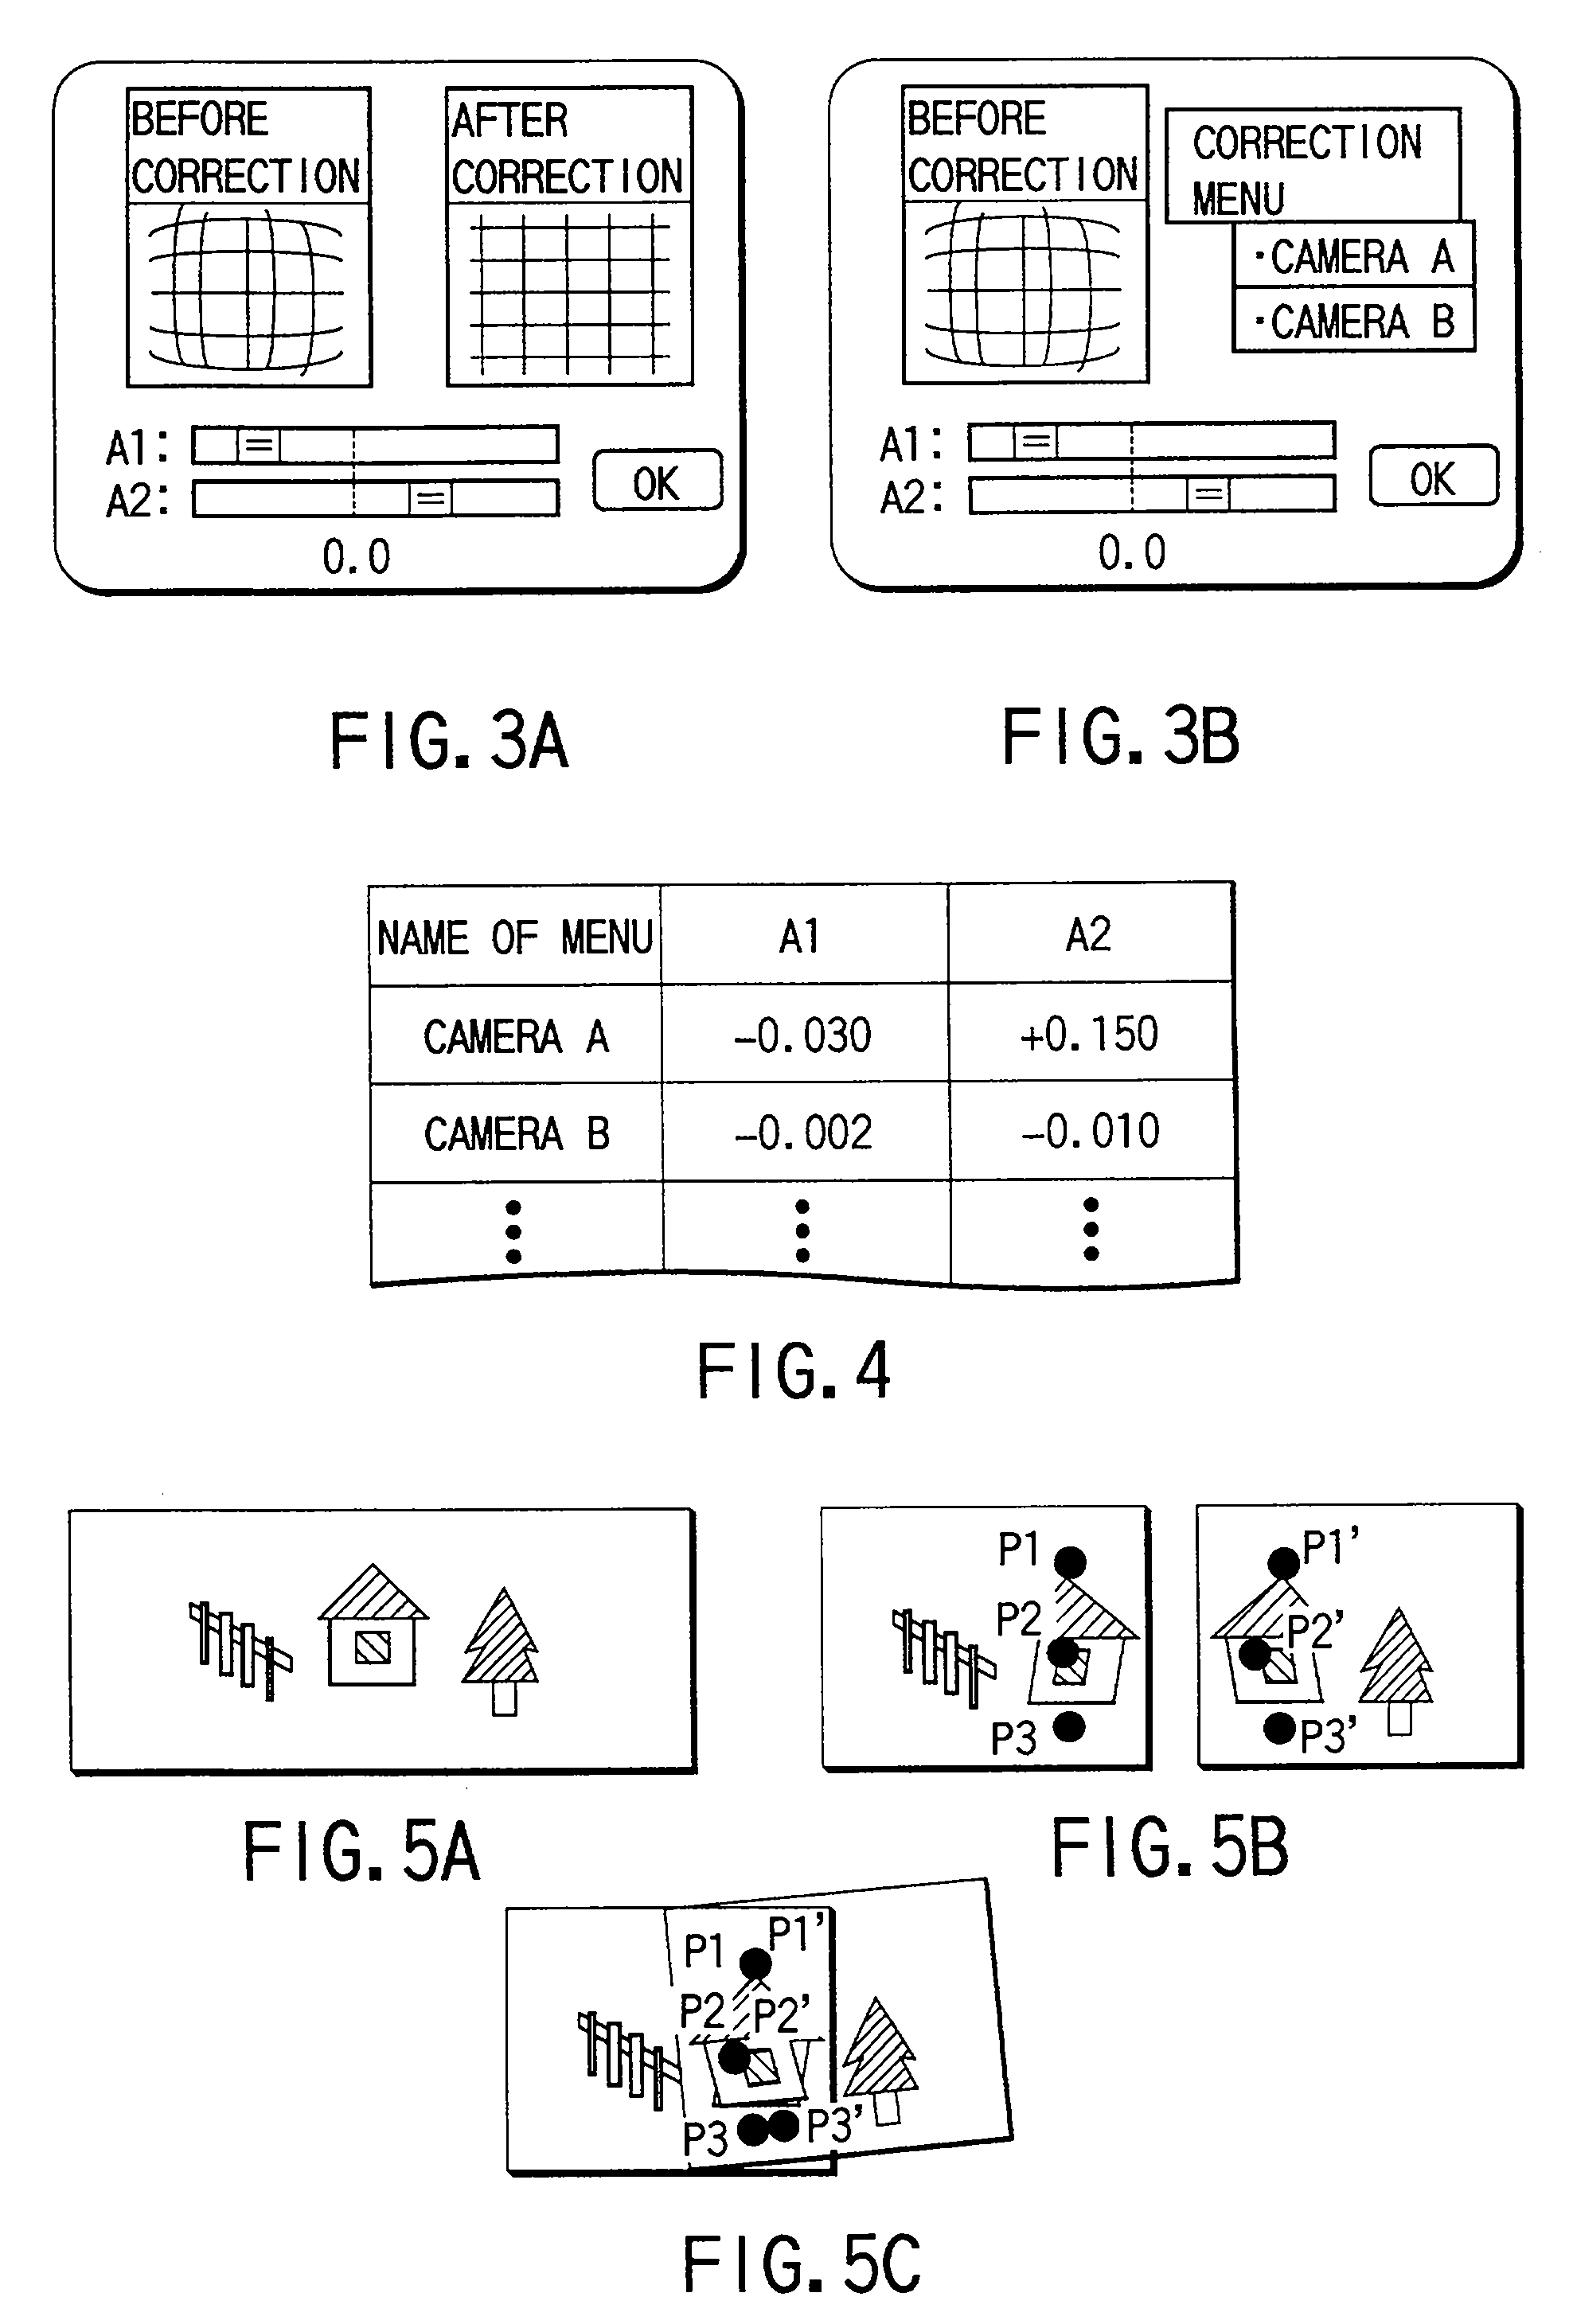 Image processing apparatus for joining a plurality of images